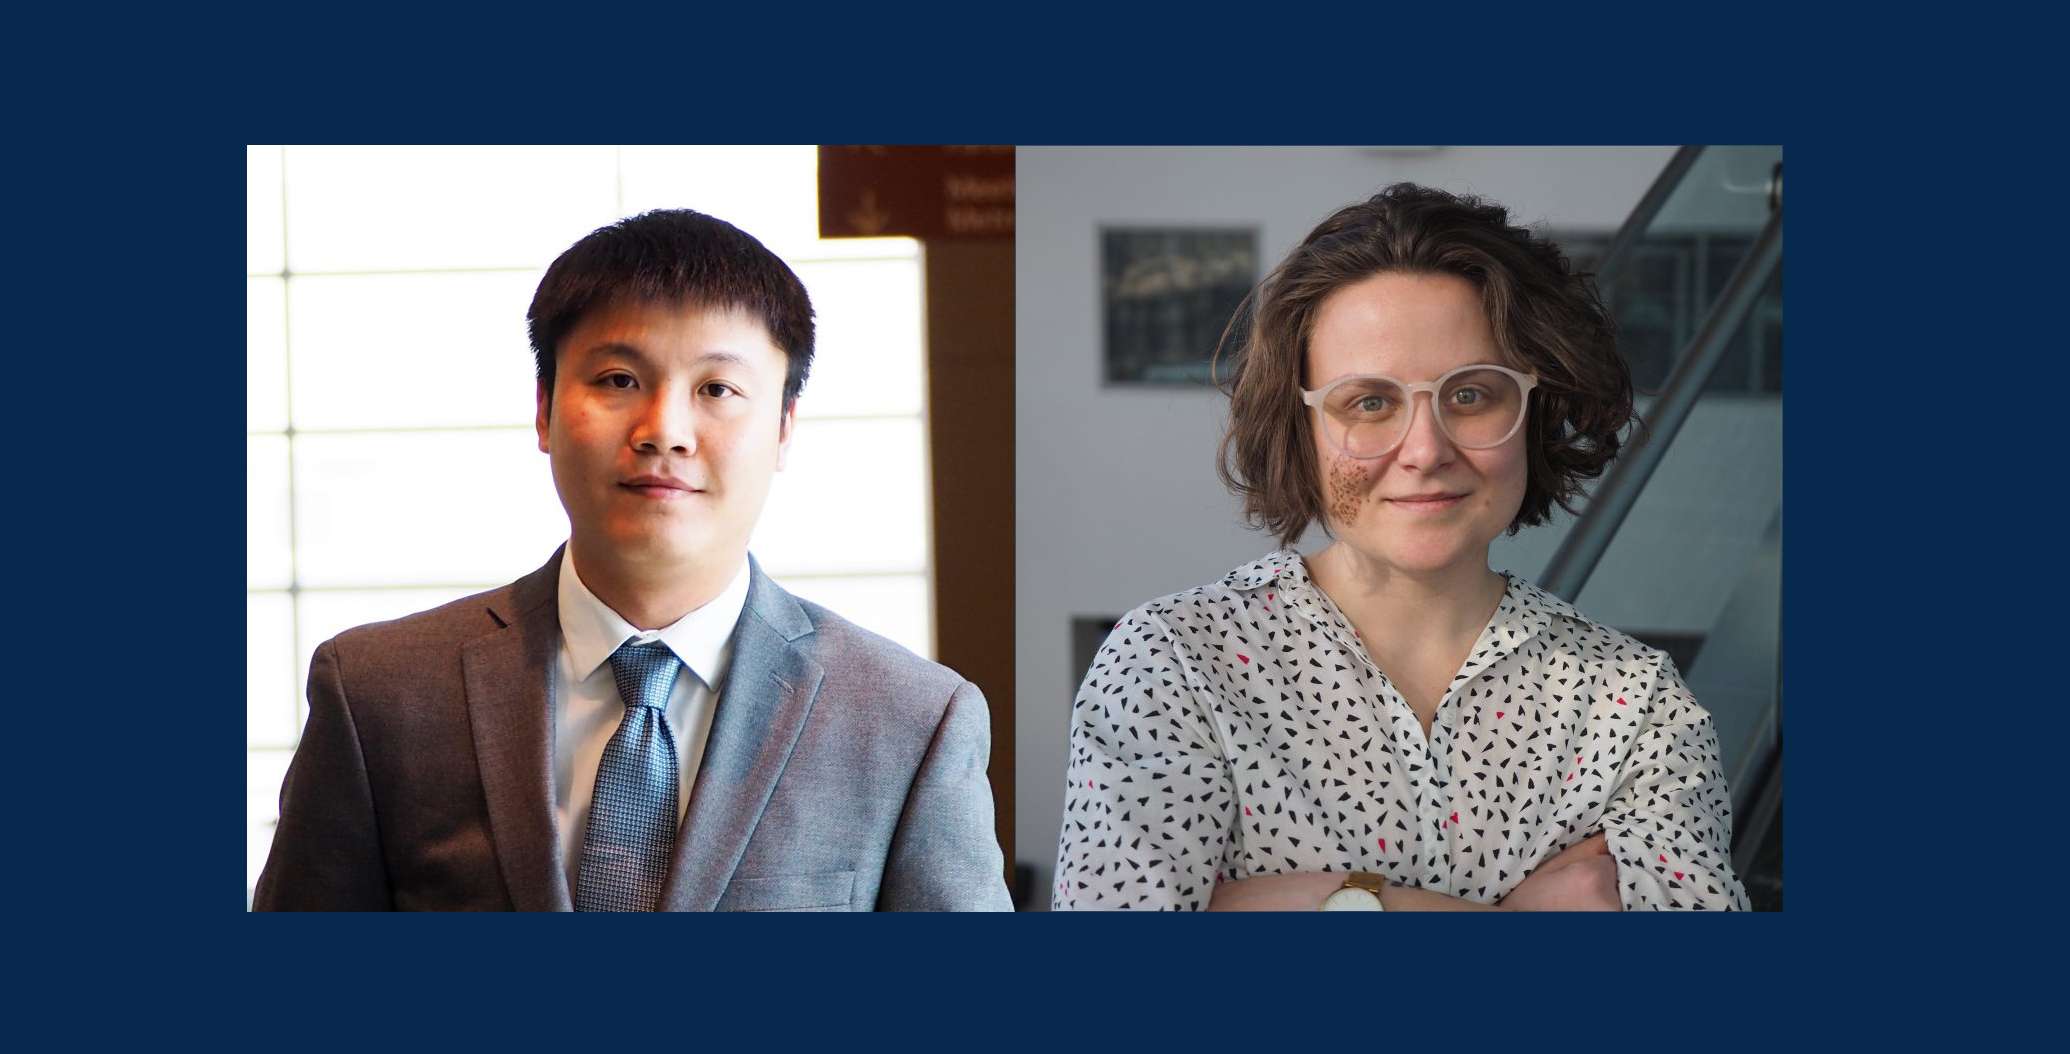 Congratulations to Our Ph.D. Students, Kanit Hantanasirisakul and Asia Sarycheva, for Successfully Defending Their Ph.D. Theses